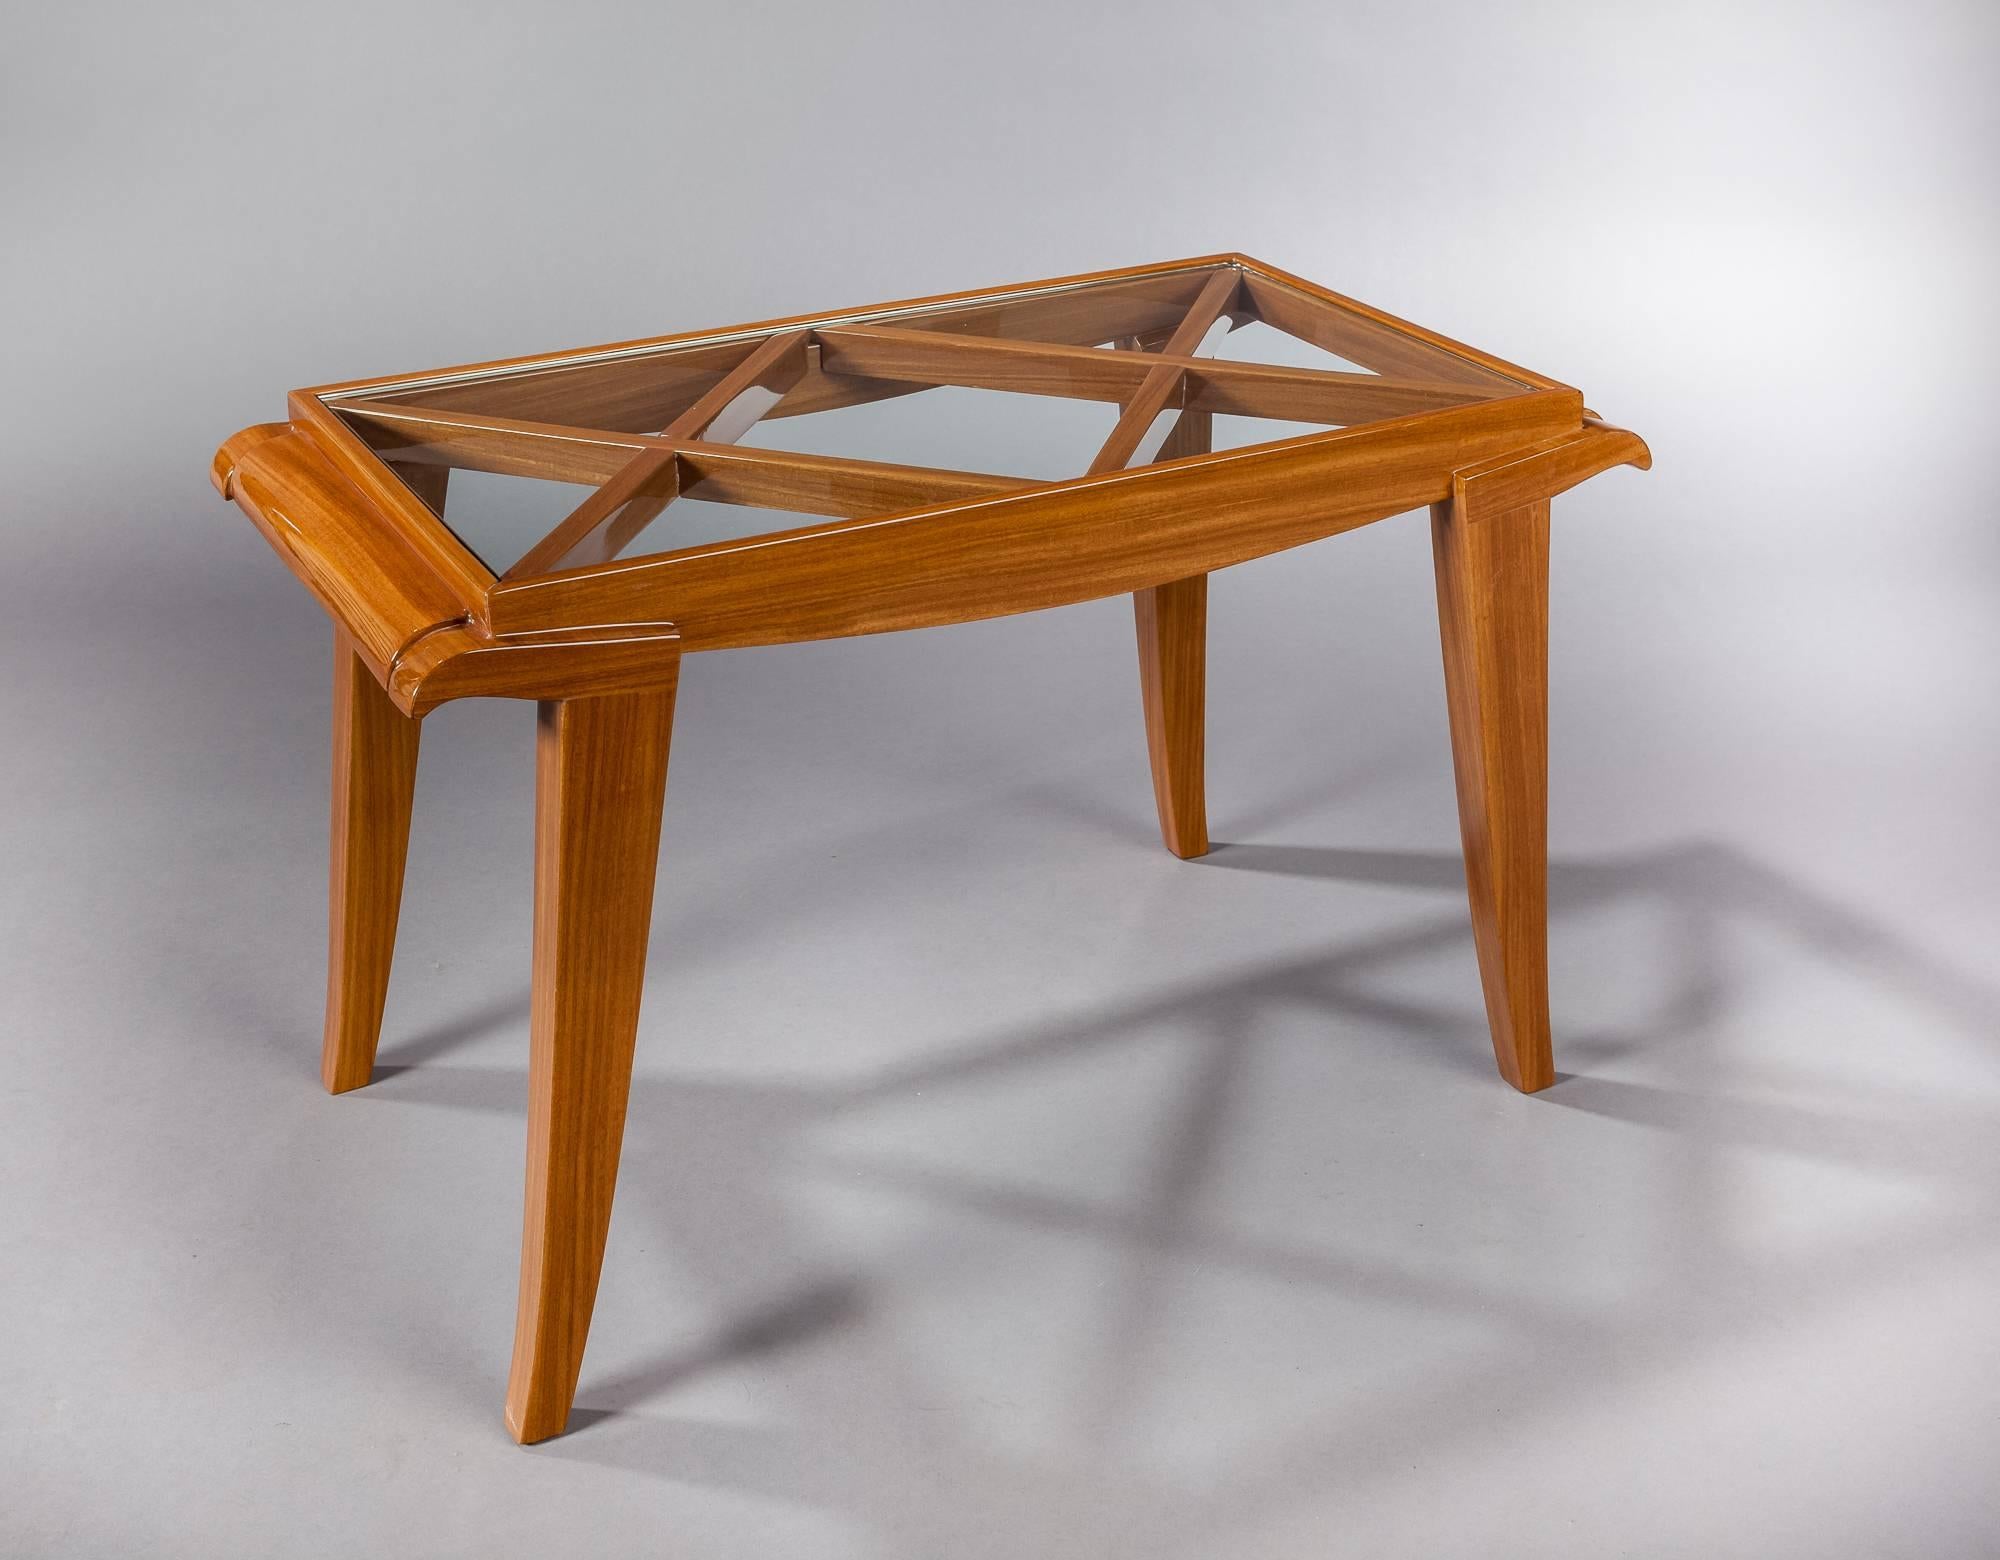 Very elegant cherry tree coffee table by great French designer Maxime Old.
This model was published in French magasin “Art et Décoration” 1948, ? 8, page 4.